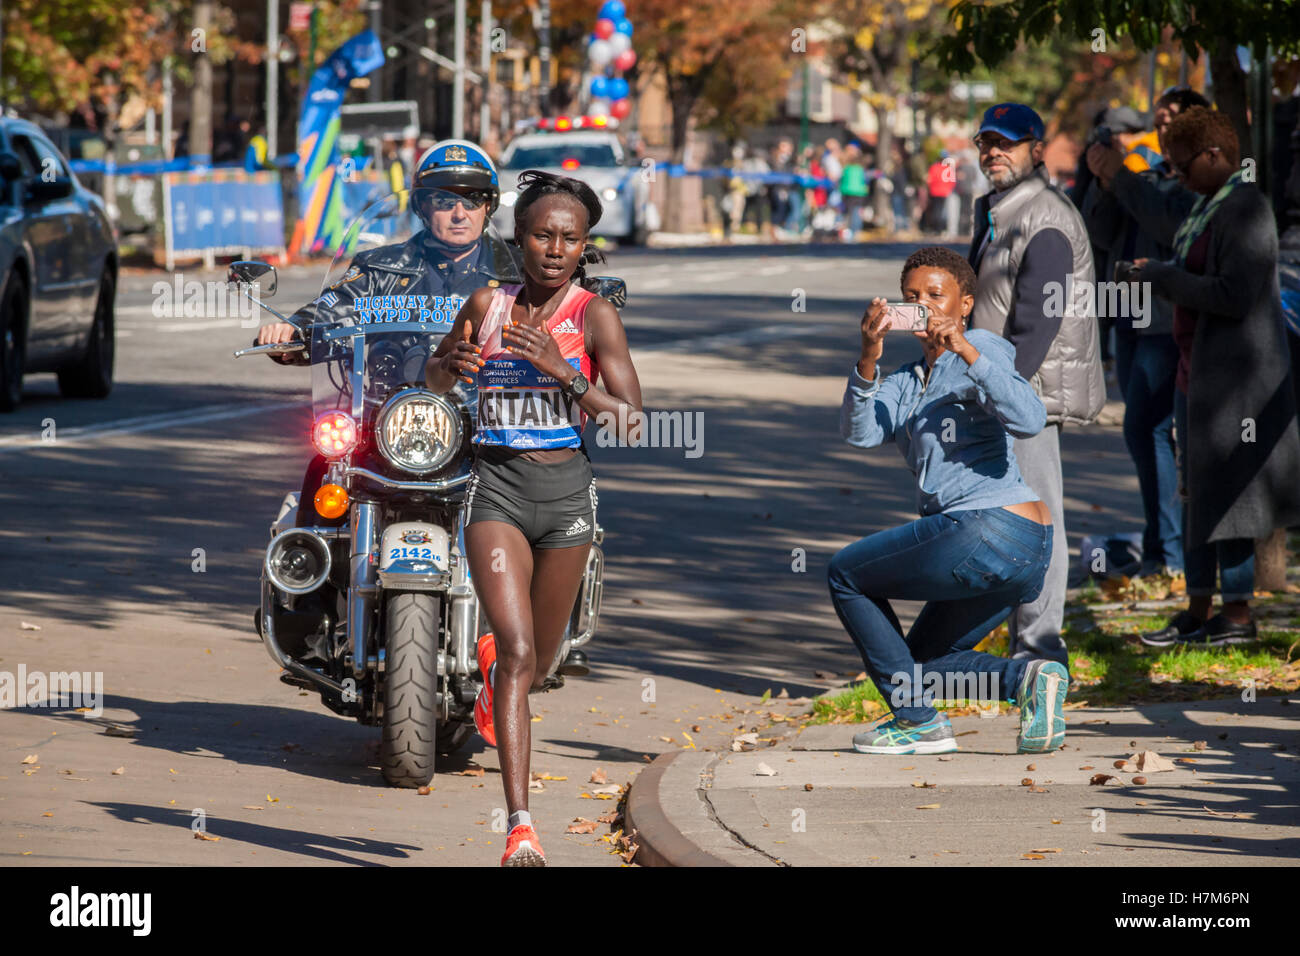 New York, USA. 06th Nov, 2016. Mary Keitany of Kenya passes through Harlem in New York near the 22 mile mark near Mount Morris Park on Sunday, November 6, 2016 in the 46th annual TCS New York City Marathon. Keitany won the women's division of the marathon finishing in 2 hours 24 minutes 26 seconds. This is her third NYC Marathon win, the first such hat trick since Grete Waitz. ( © Richard B. Levine) Credit:  Richard Levine/Alamy Live News Stock Photo